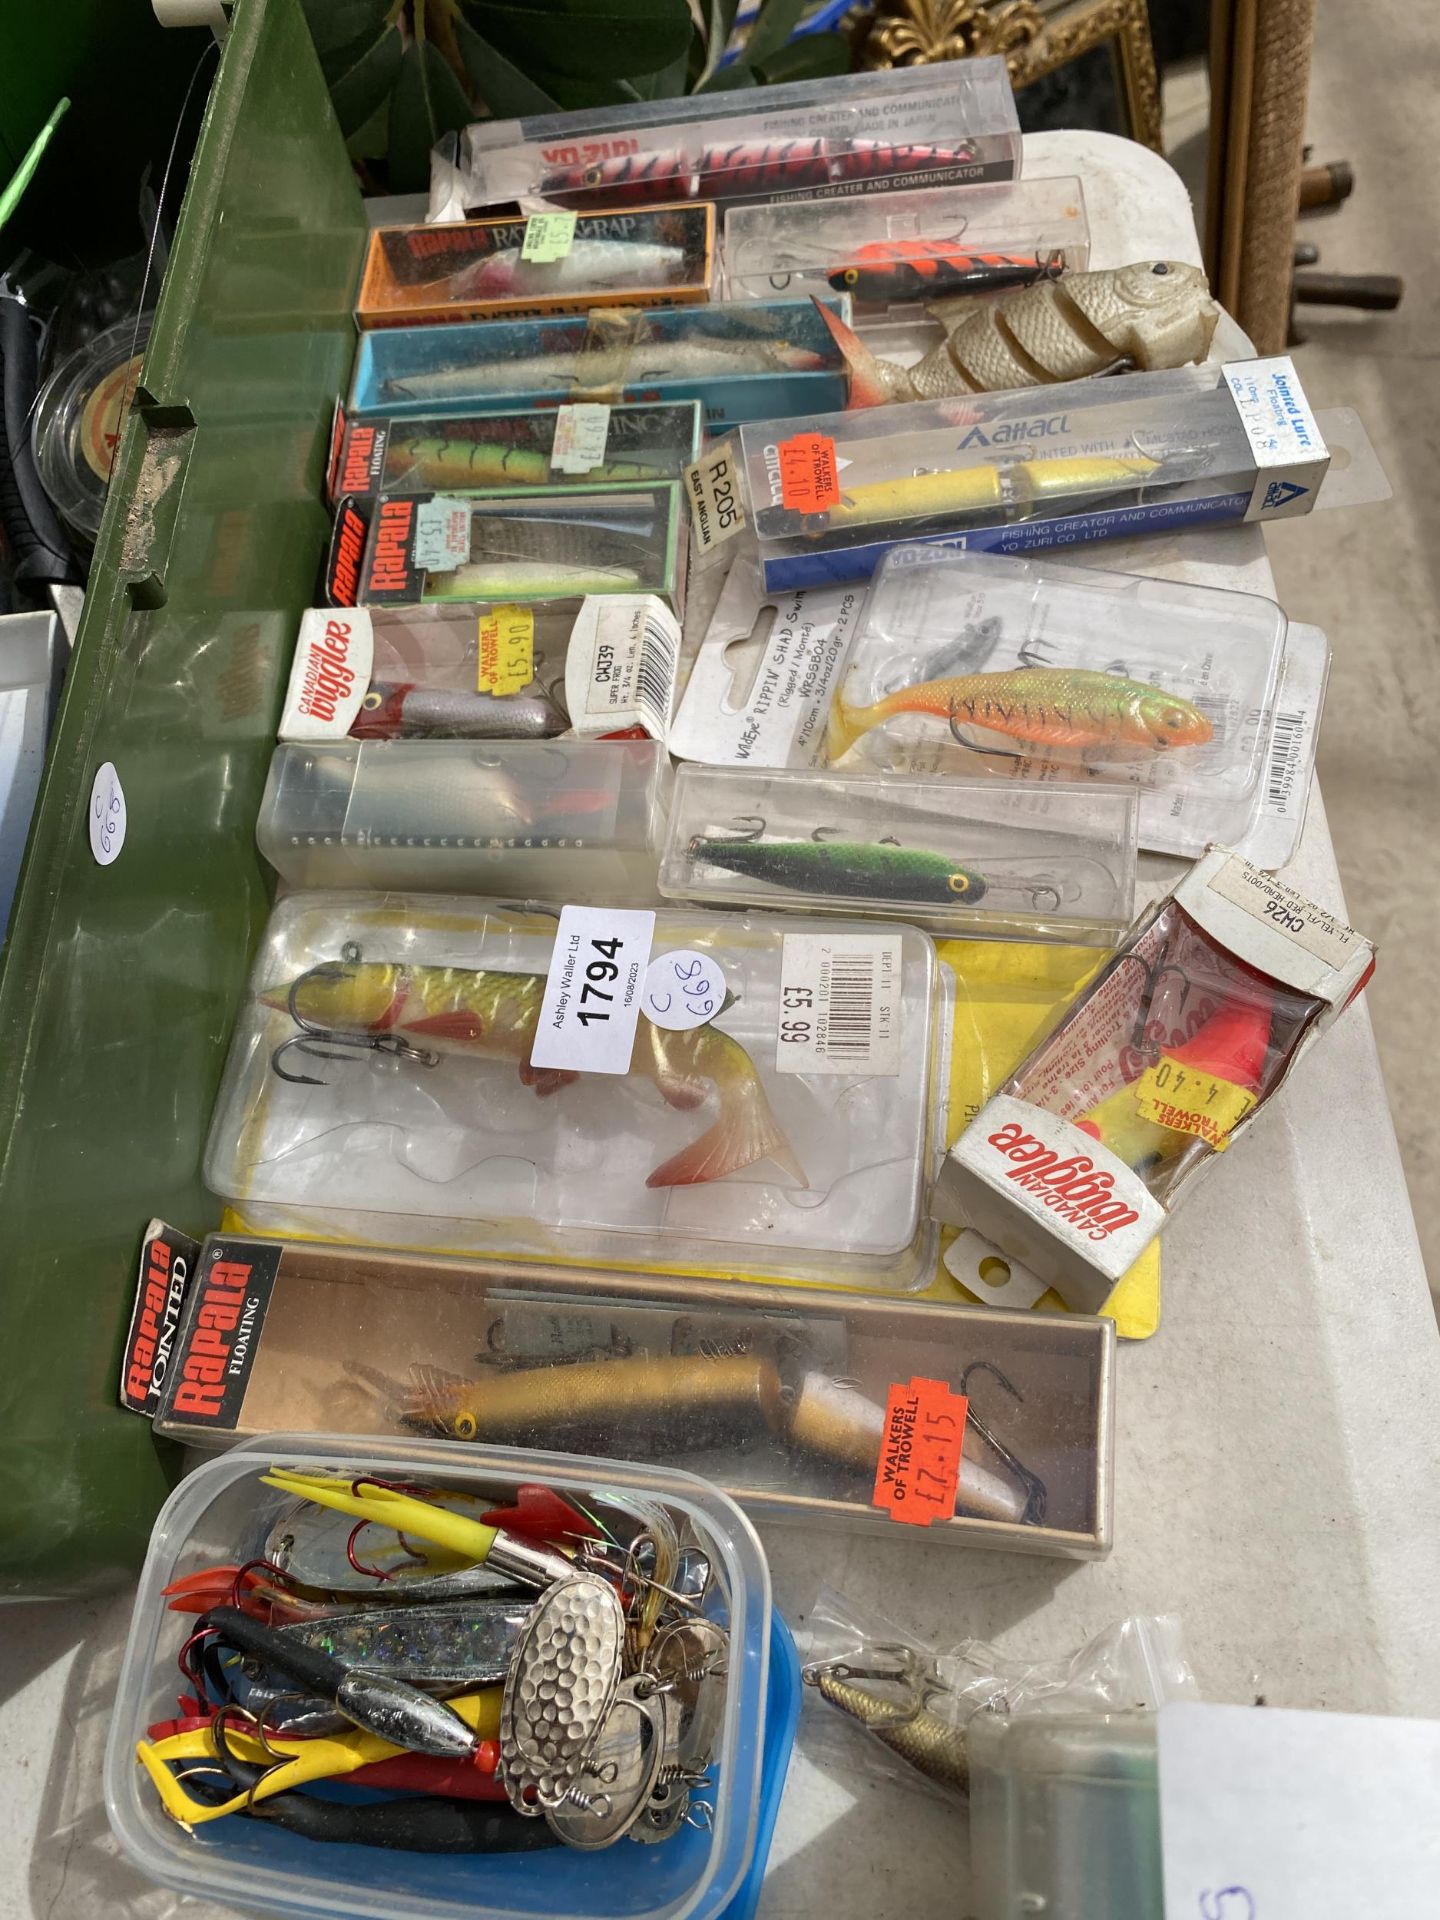 A LARGE COLLECTION OF FISHING EQUIPMENT, BAITS ETC - Image 4 of 6